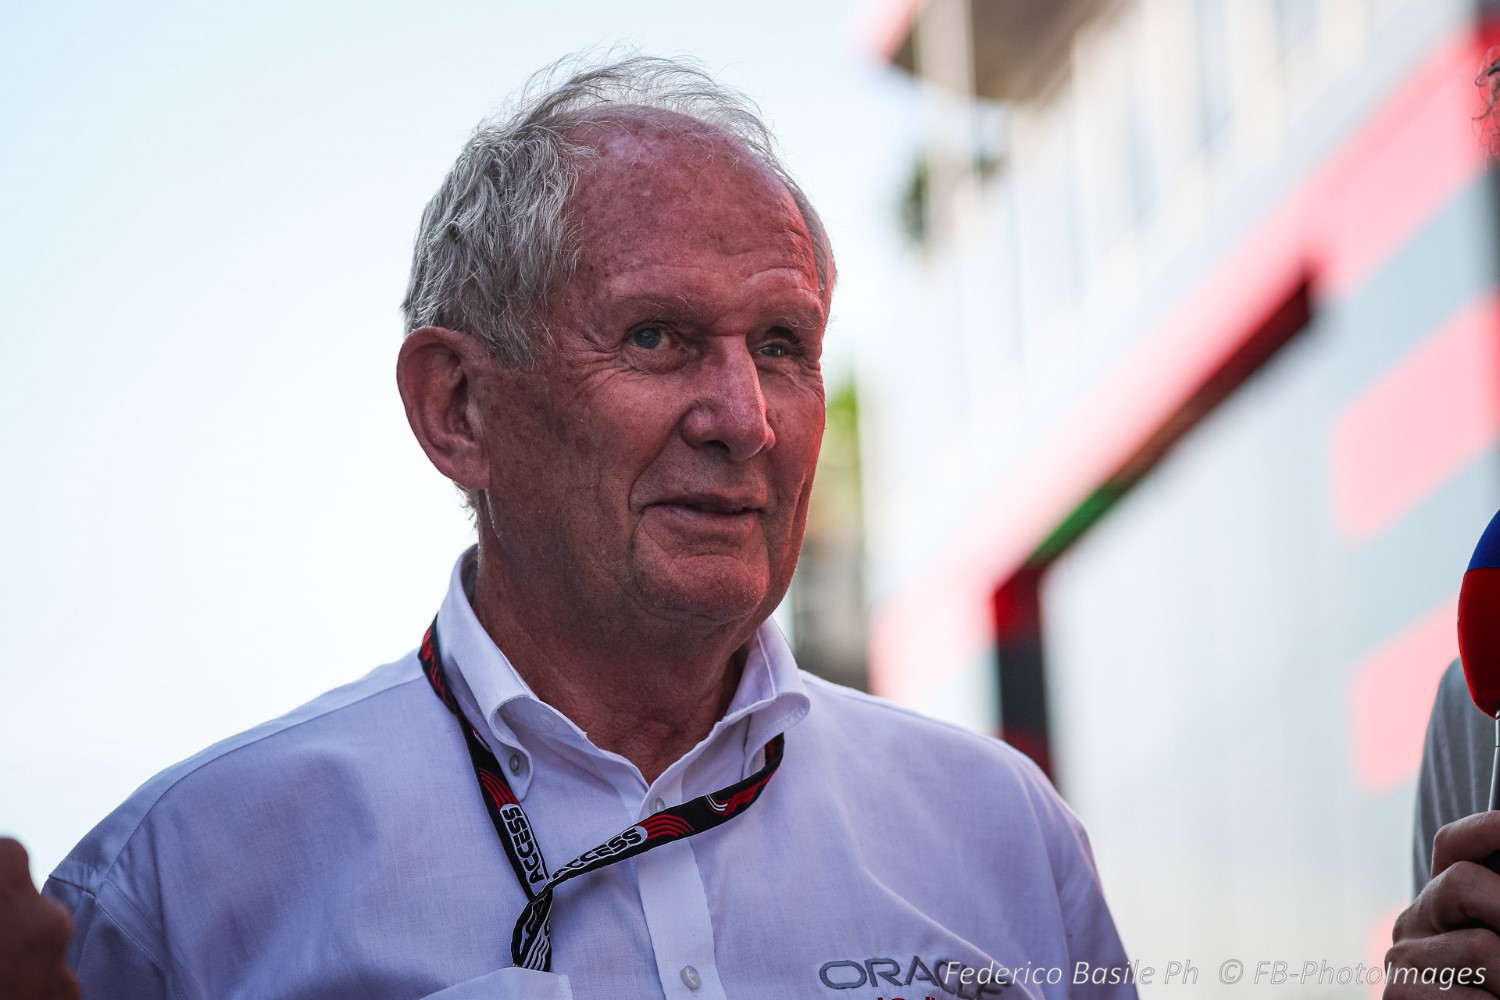 Helmut Marko former driver and current advisor to the Red Bull, head of Red Bull's driver development, during the Hungarian GP, Budapest 20-23 July 2023 at the Hungaroring, Formula 1 World championship 2023.